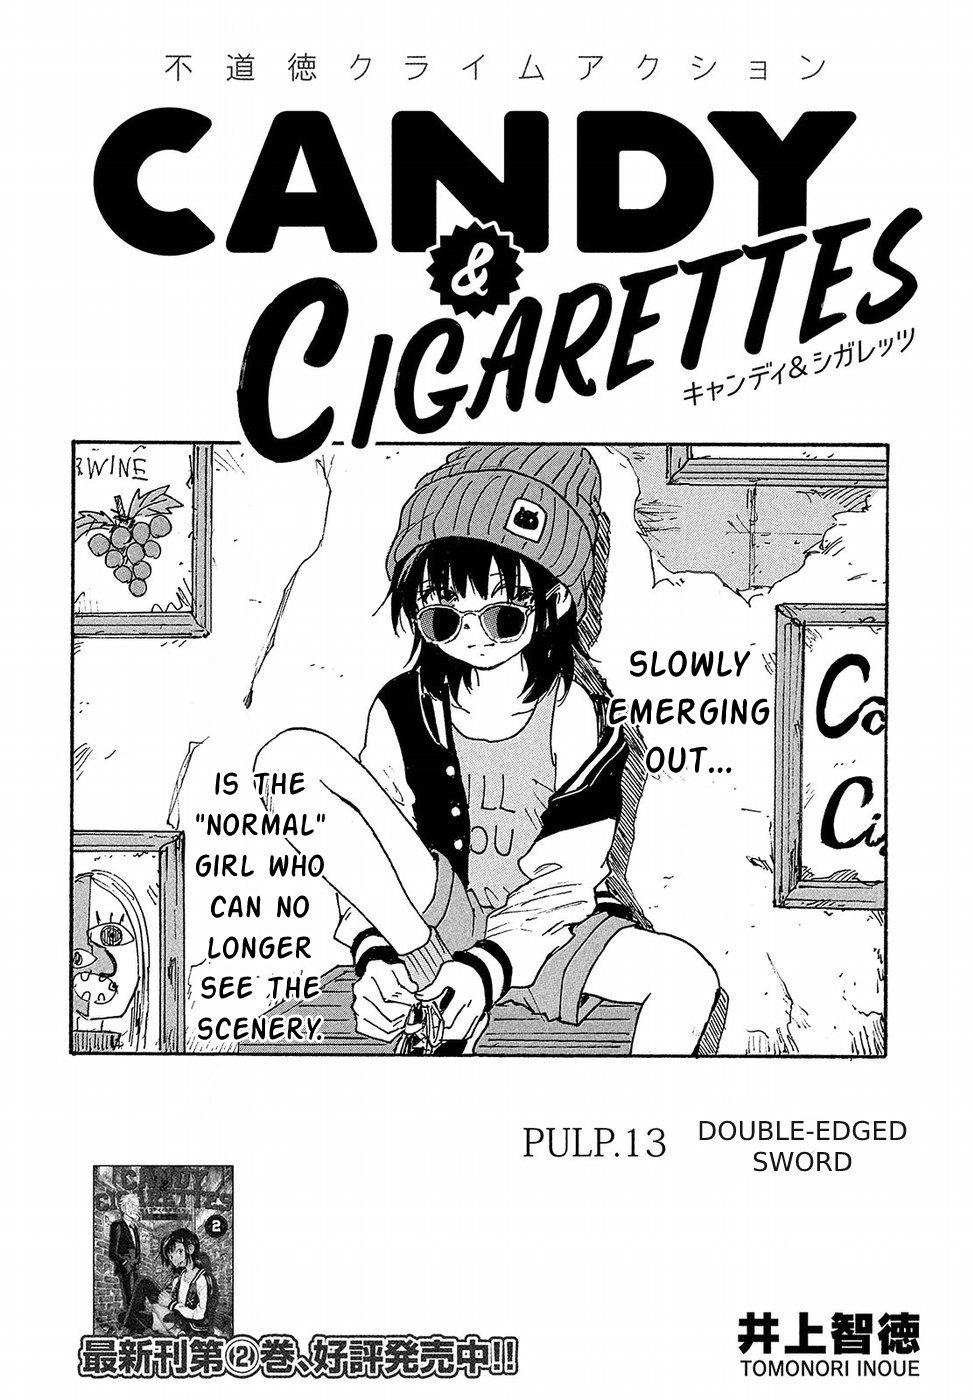 Candy & Cigarettes Vol.3 Chapter 13: Double-Edged Sword - Picture 2